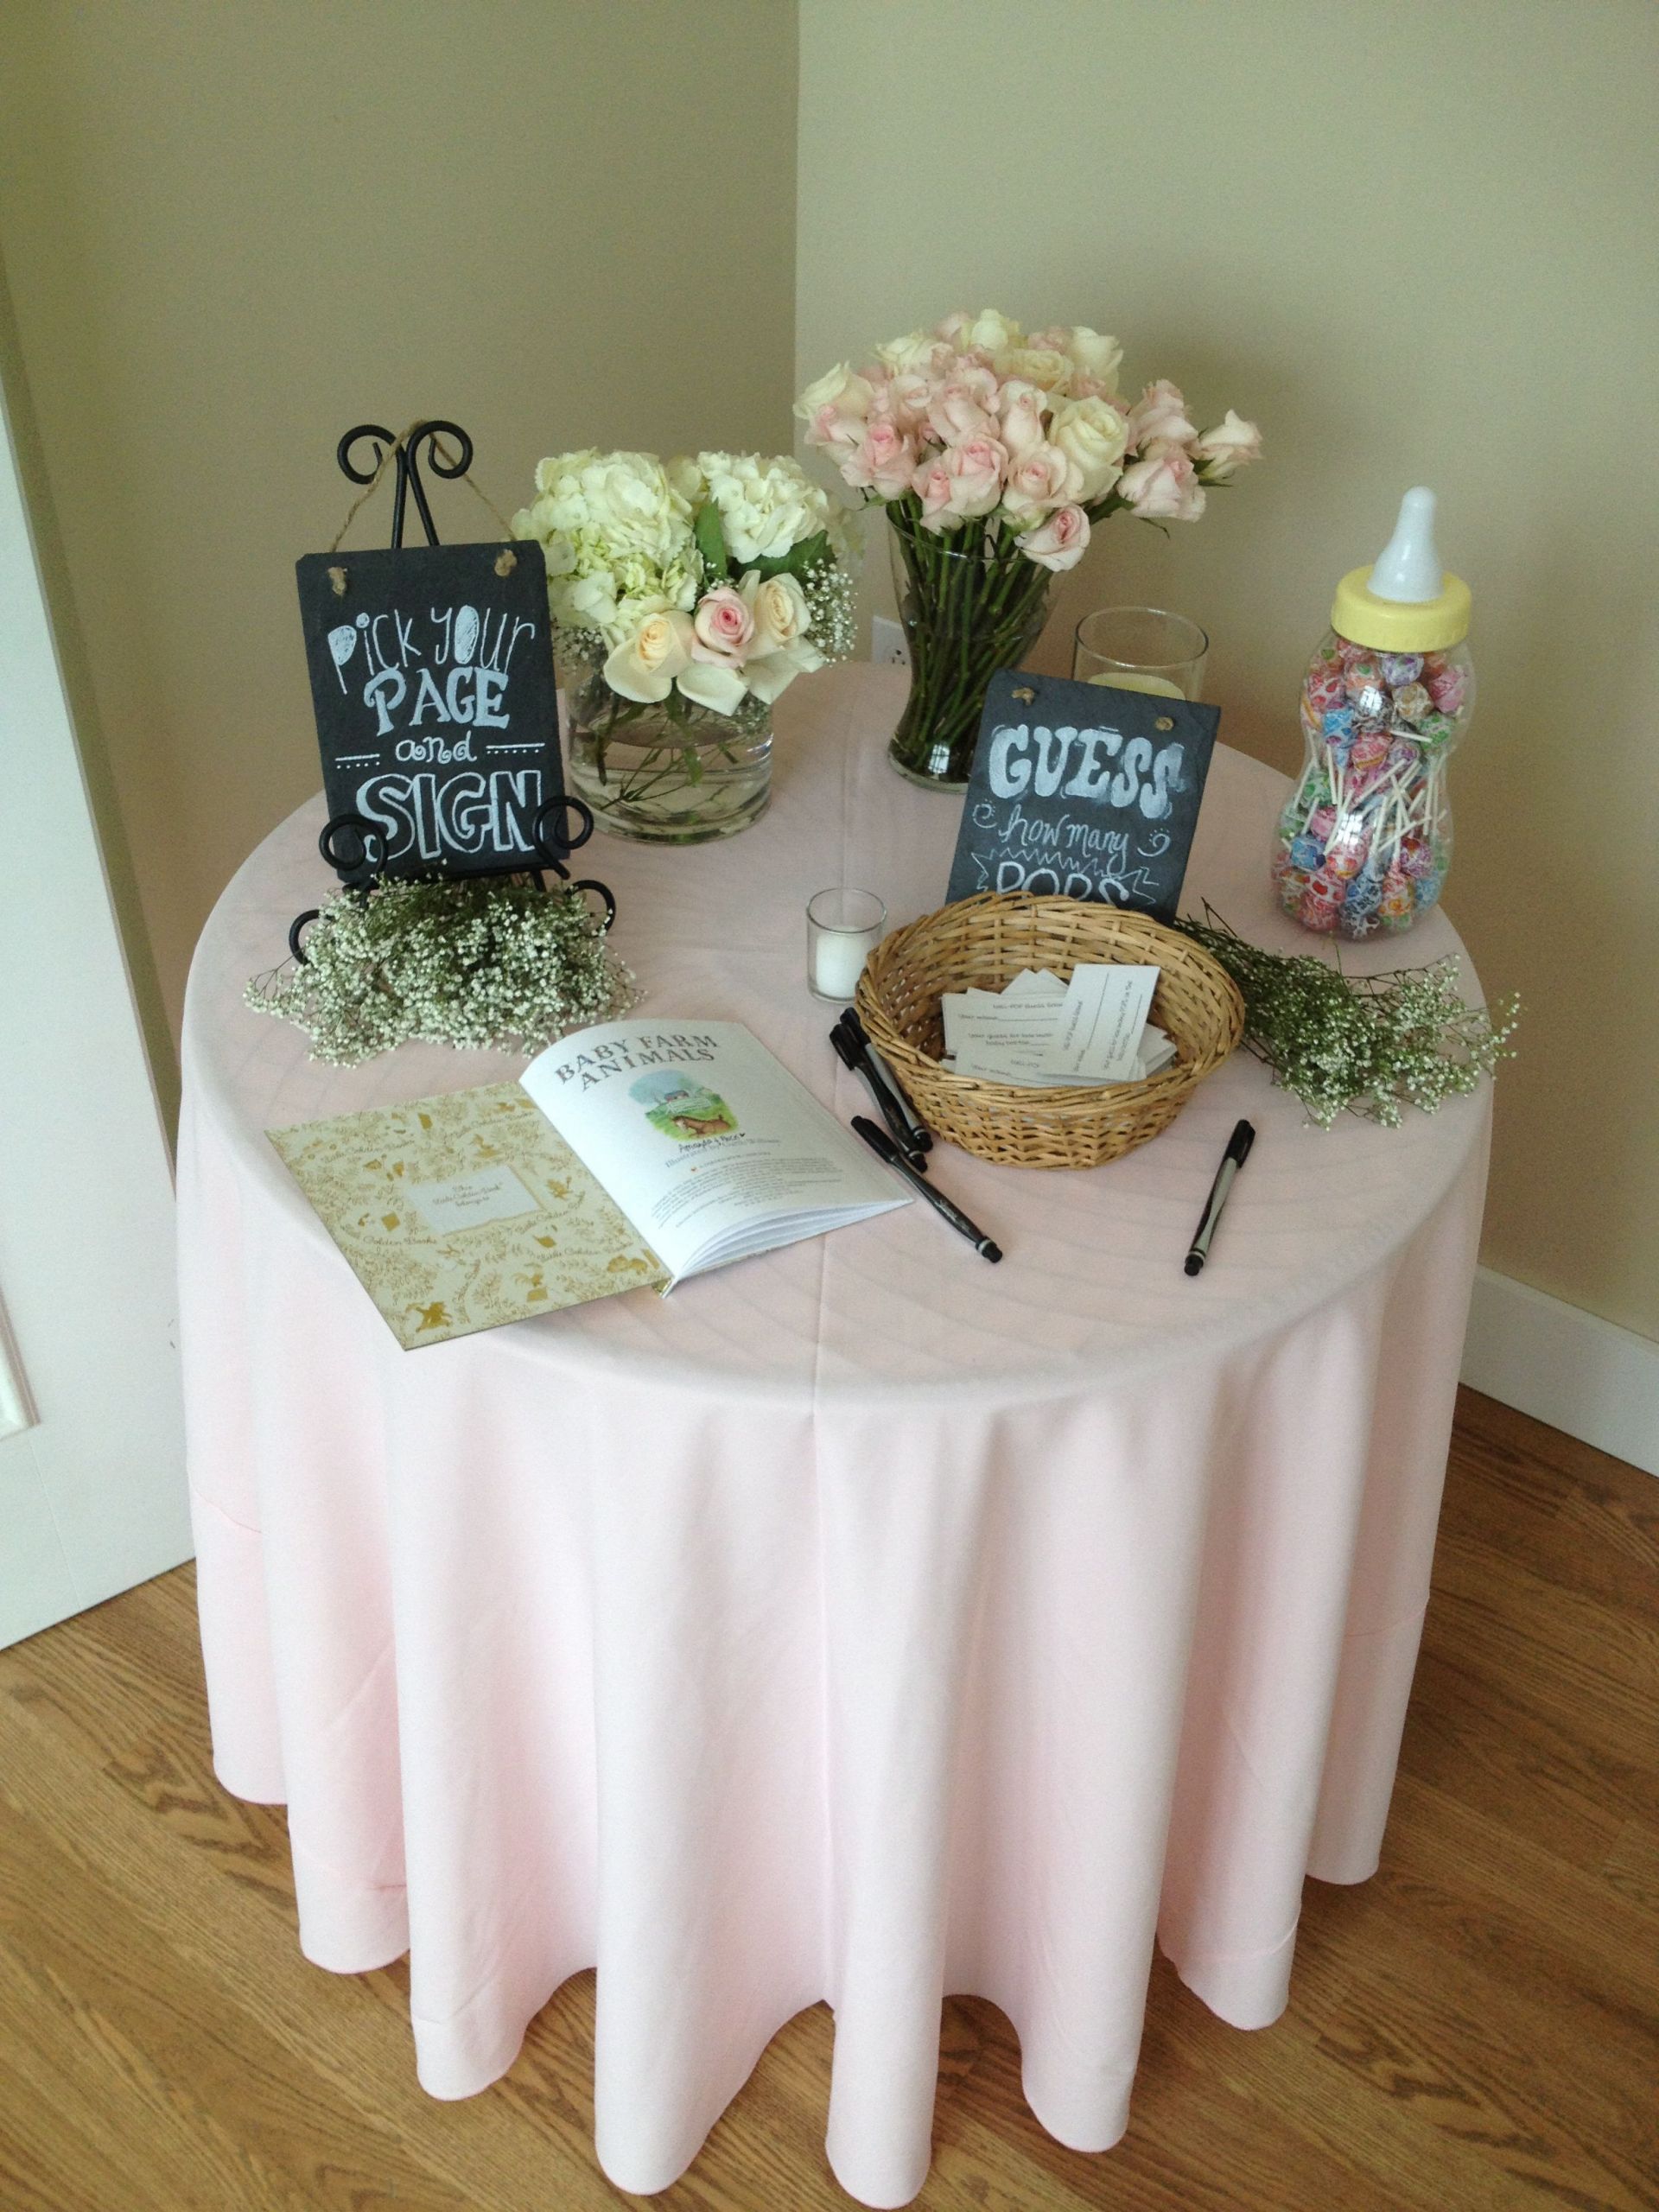 Gift Table Ideas For Baby Shower
 Entrance Table at a baby shower